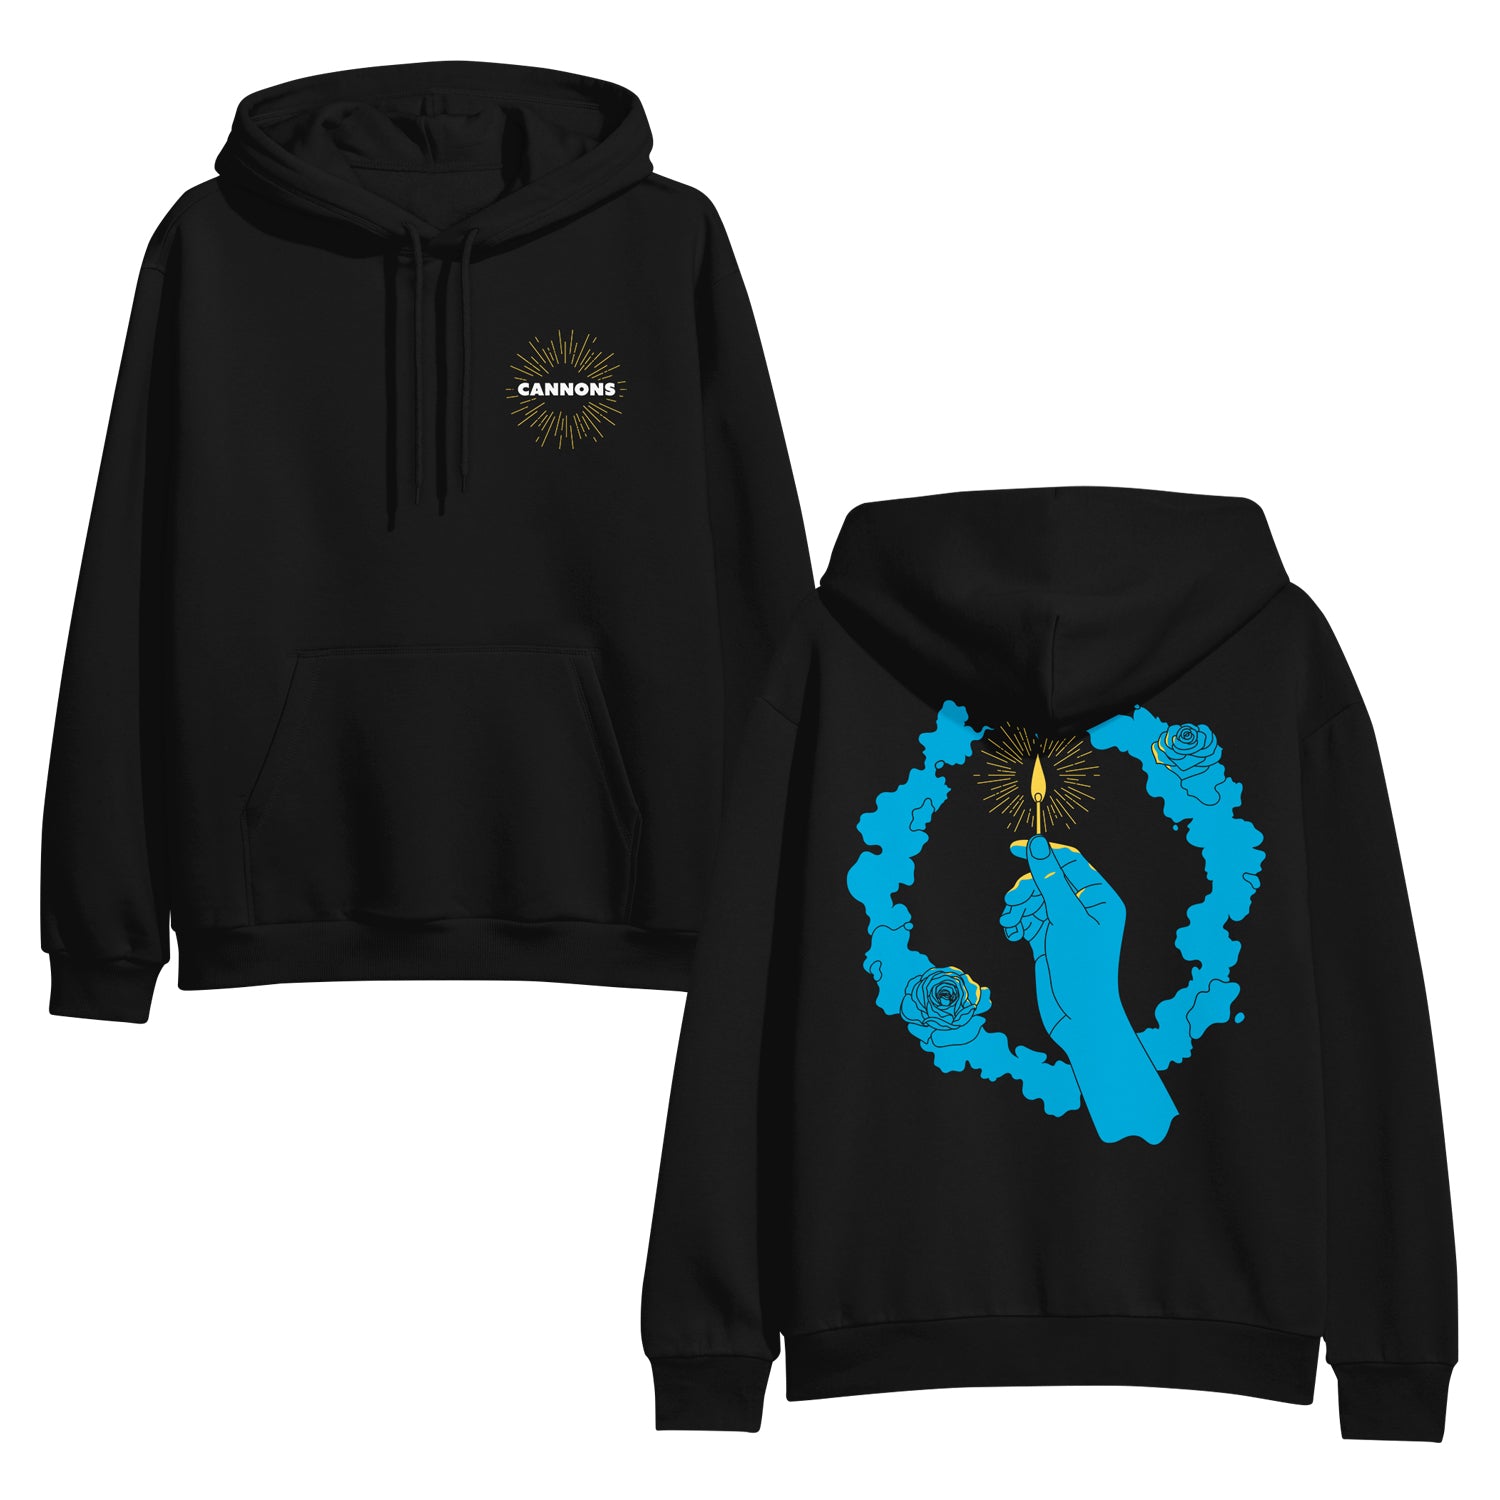 Image of the front and back of a black hooded sweatshirt on a white background. The front of the hoodie on the left chest says cannons in white writing, surrounded by the aura of a candle. The back of the hoodie is blue and features a hand holding up a match with a yellow flame and the same aura around the match. Surrounding the hand is a circle flower wreath in blue.